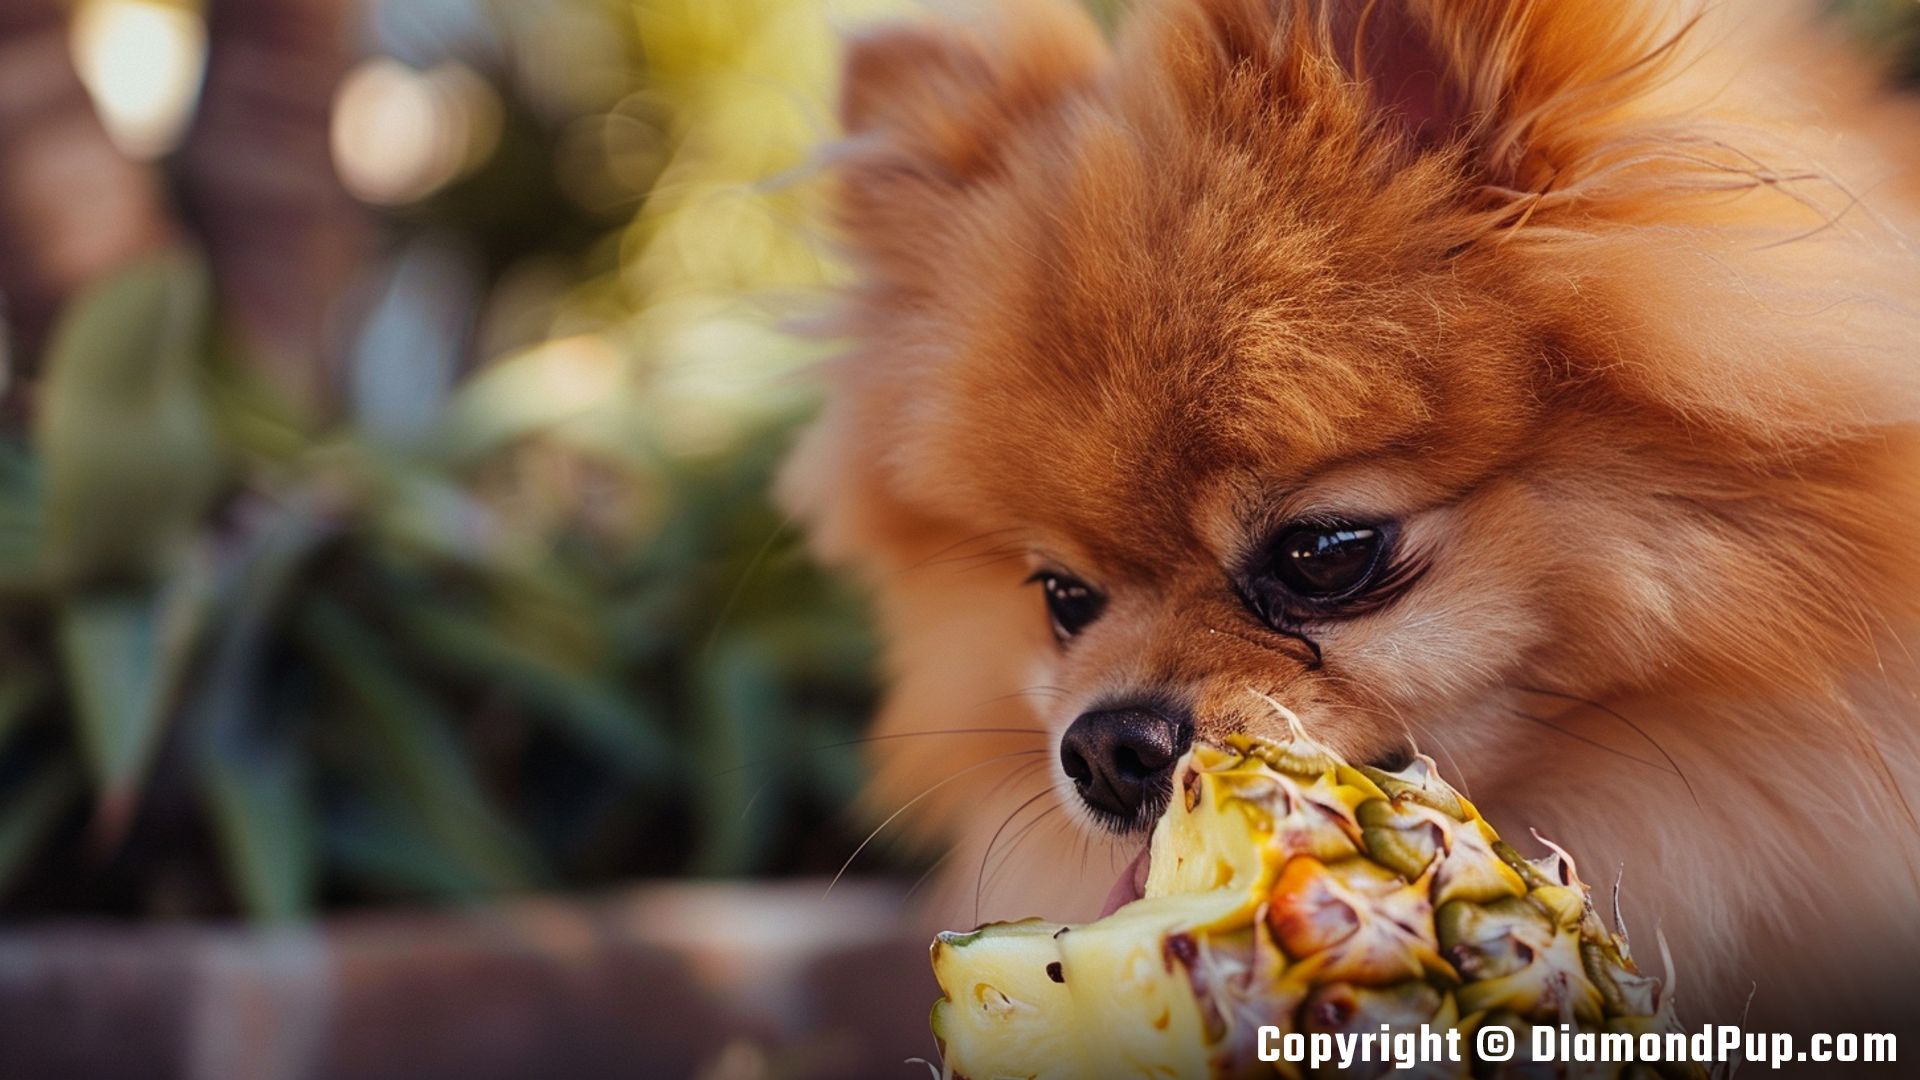 Image of an Adorable Pomeranian Snacking on Pineapple